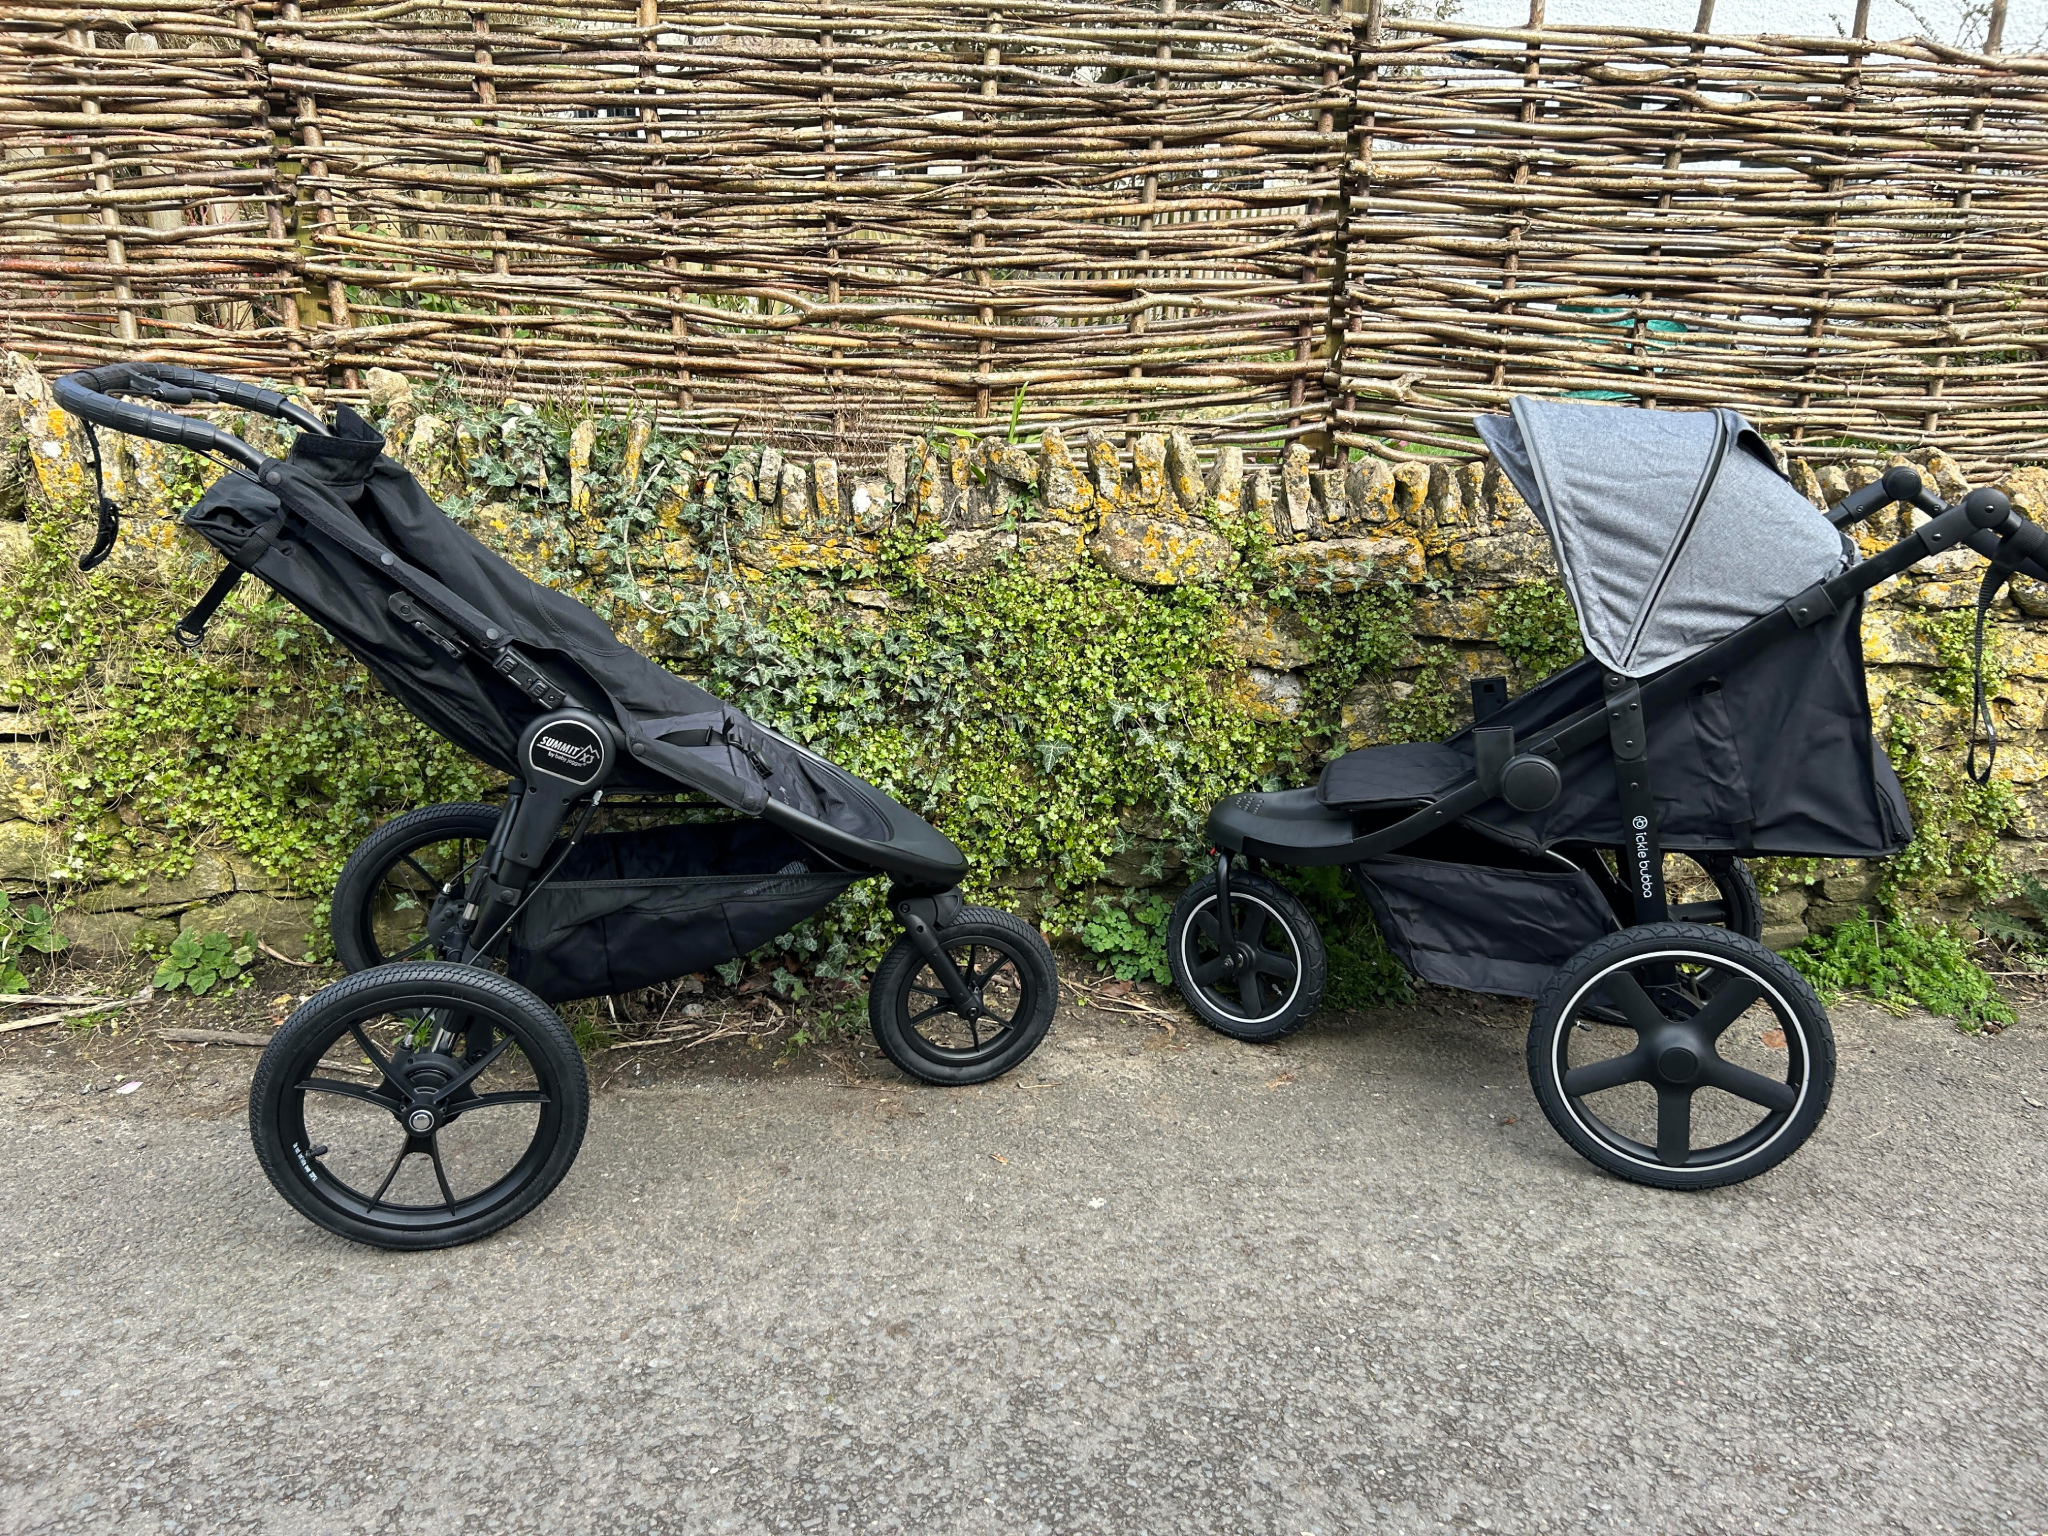 We considered practicality and comfort while testing a range of buggies